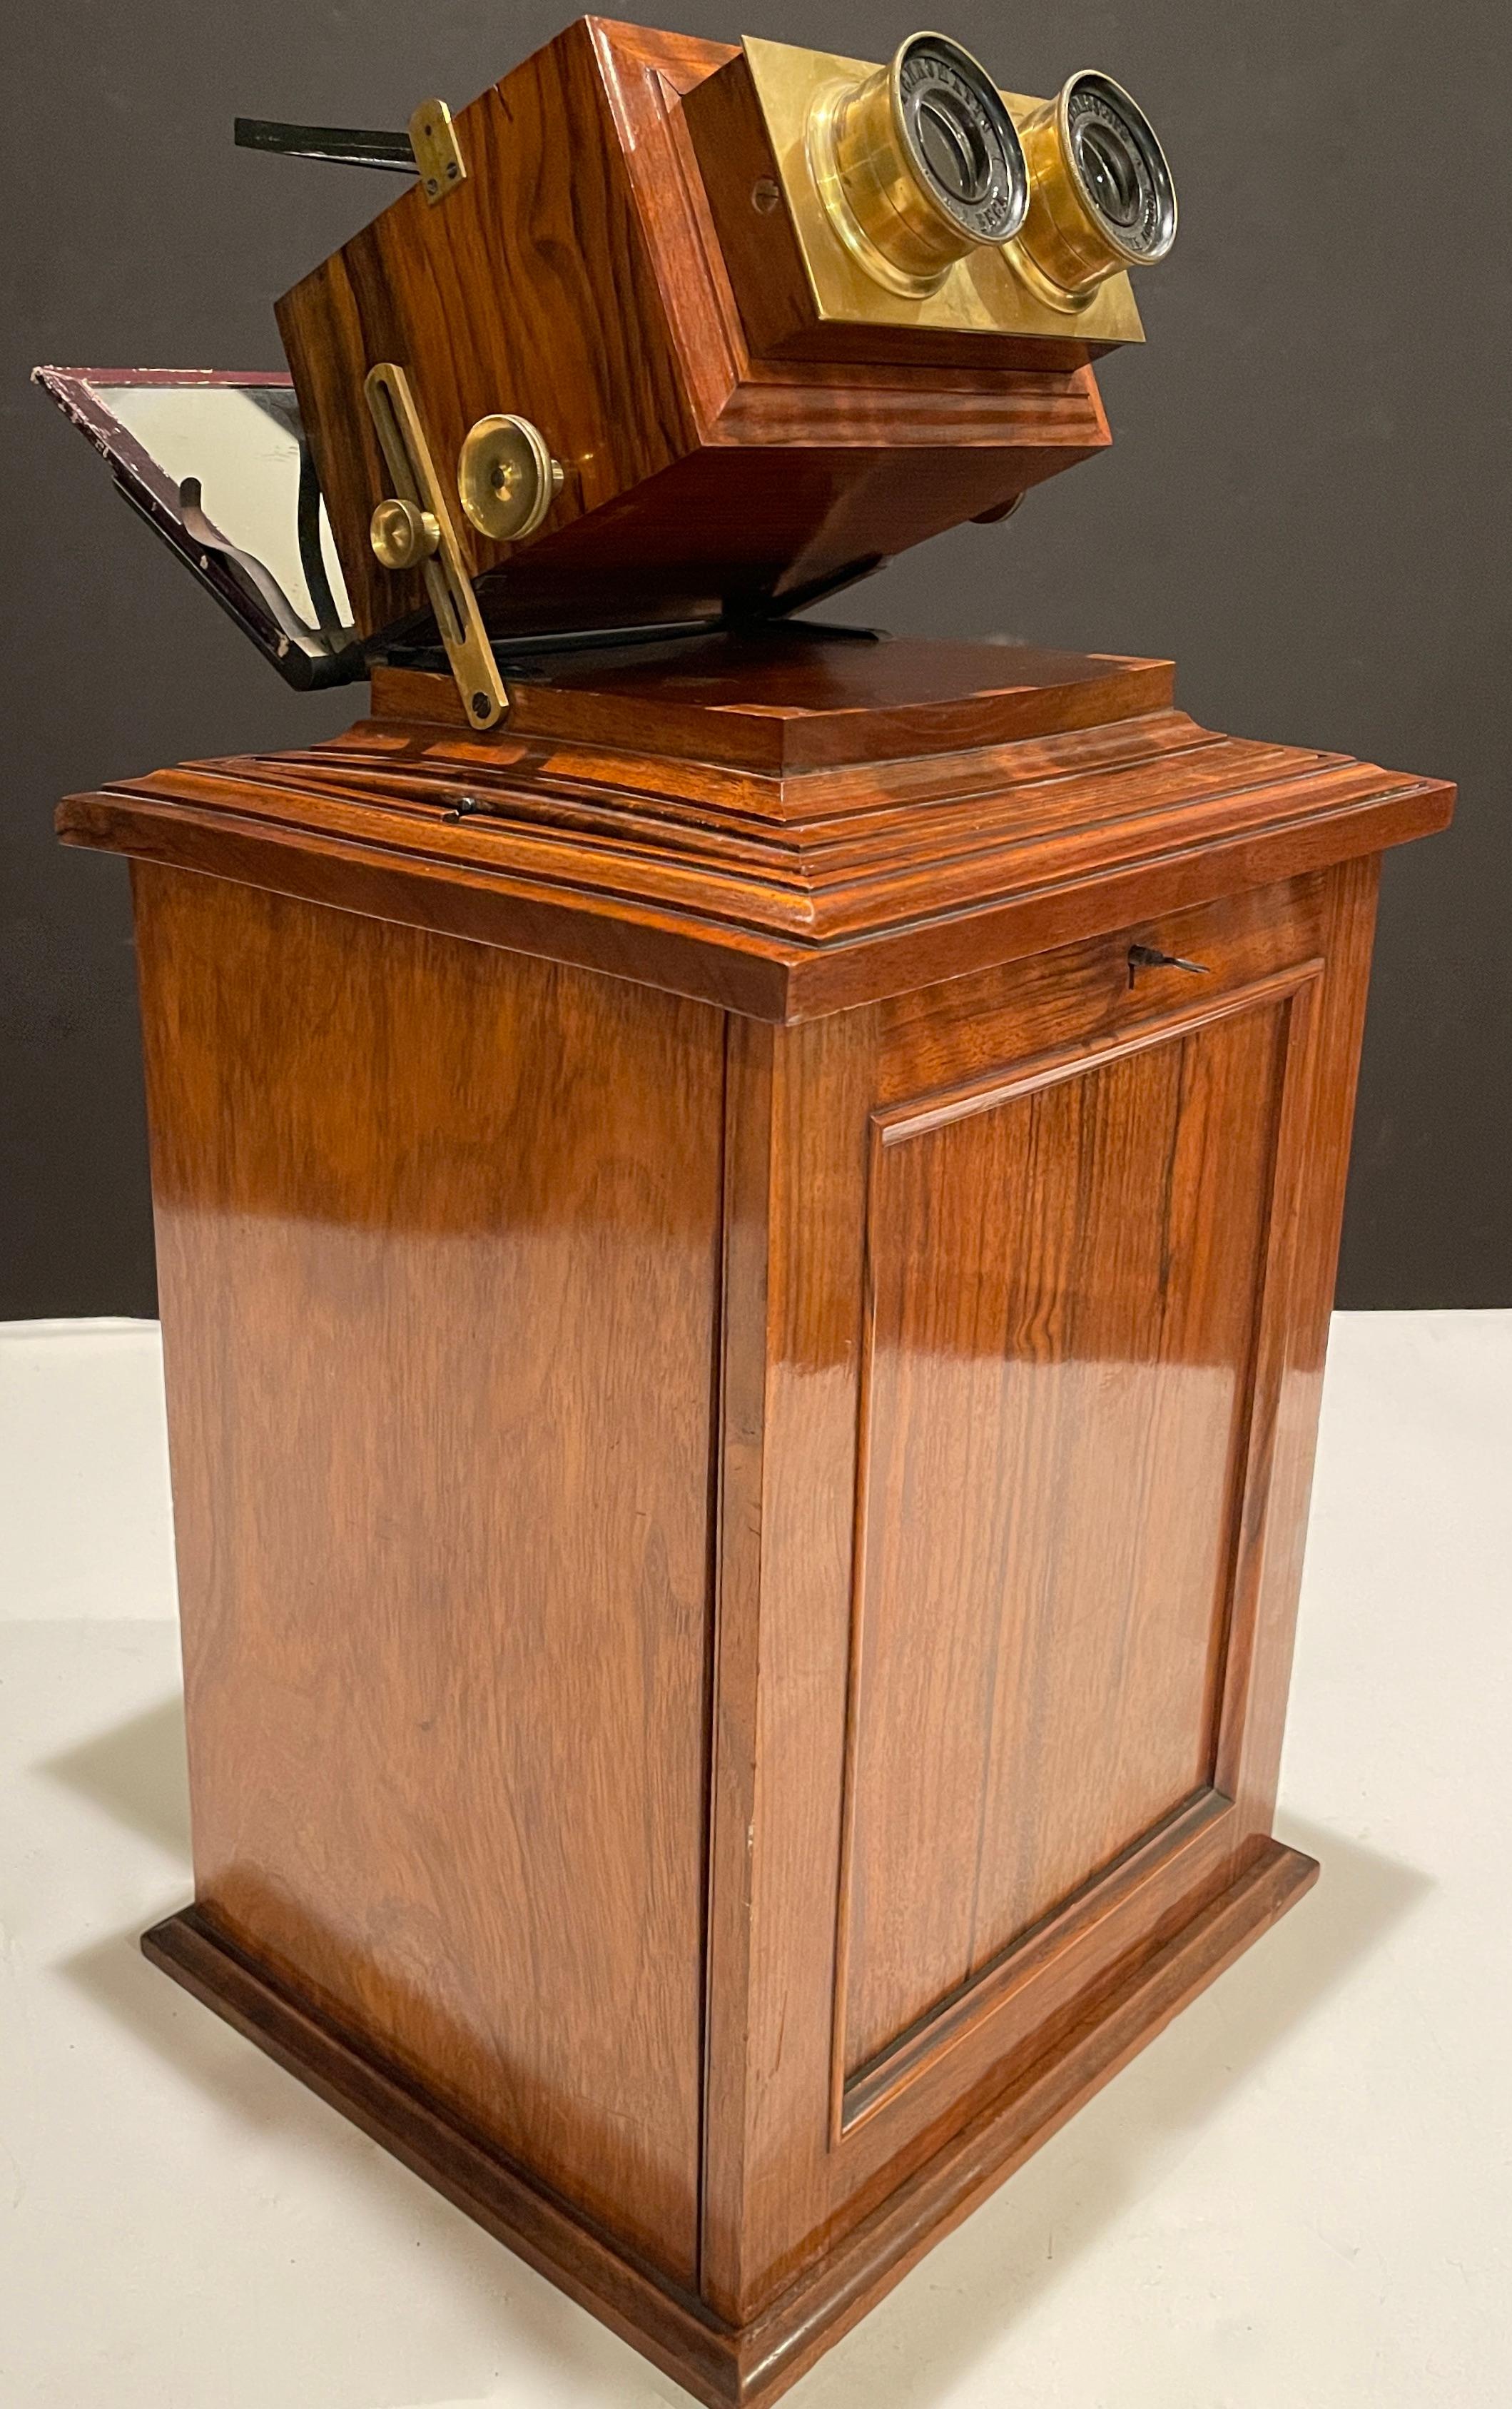 Museum quality tabletop Stereoscope by British maker R. & J. Beck London. It is fitted with with adjustable rack and pinion focusing and elevation adjustment for ease of viewing. Each eyepiece is adjustable so the instrument can be tailored to the